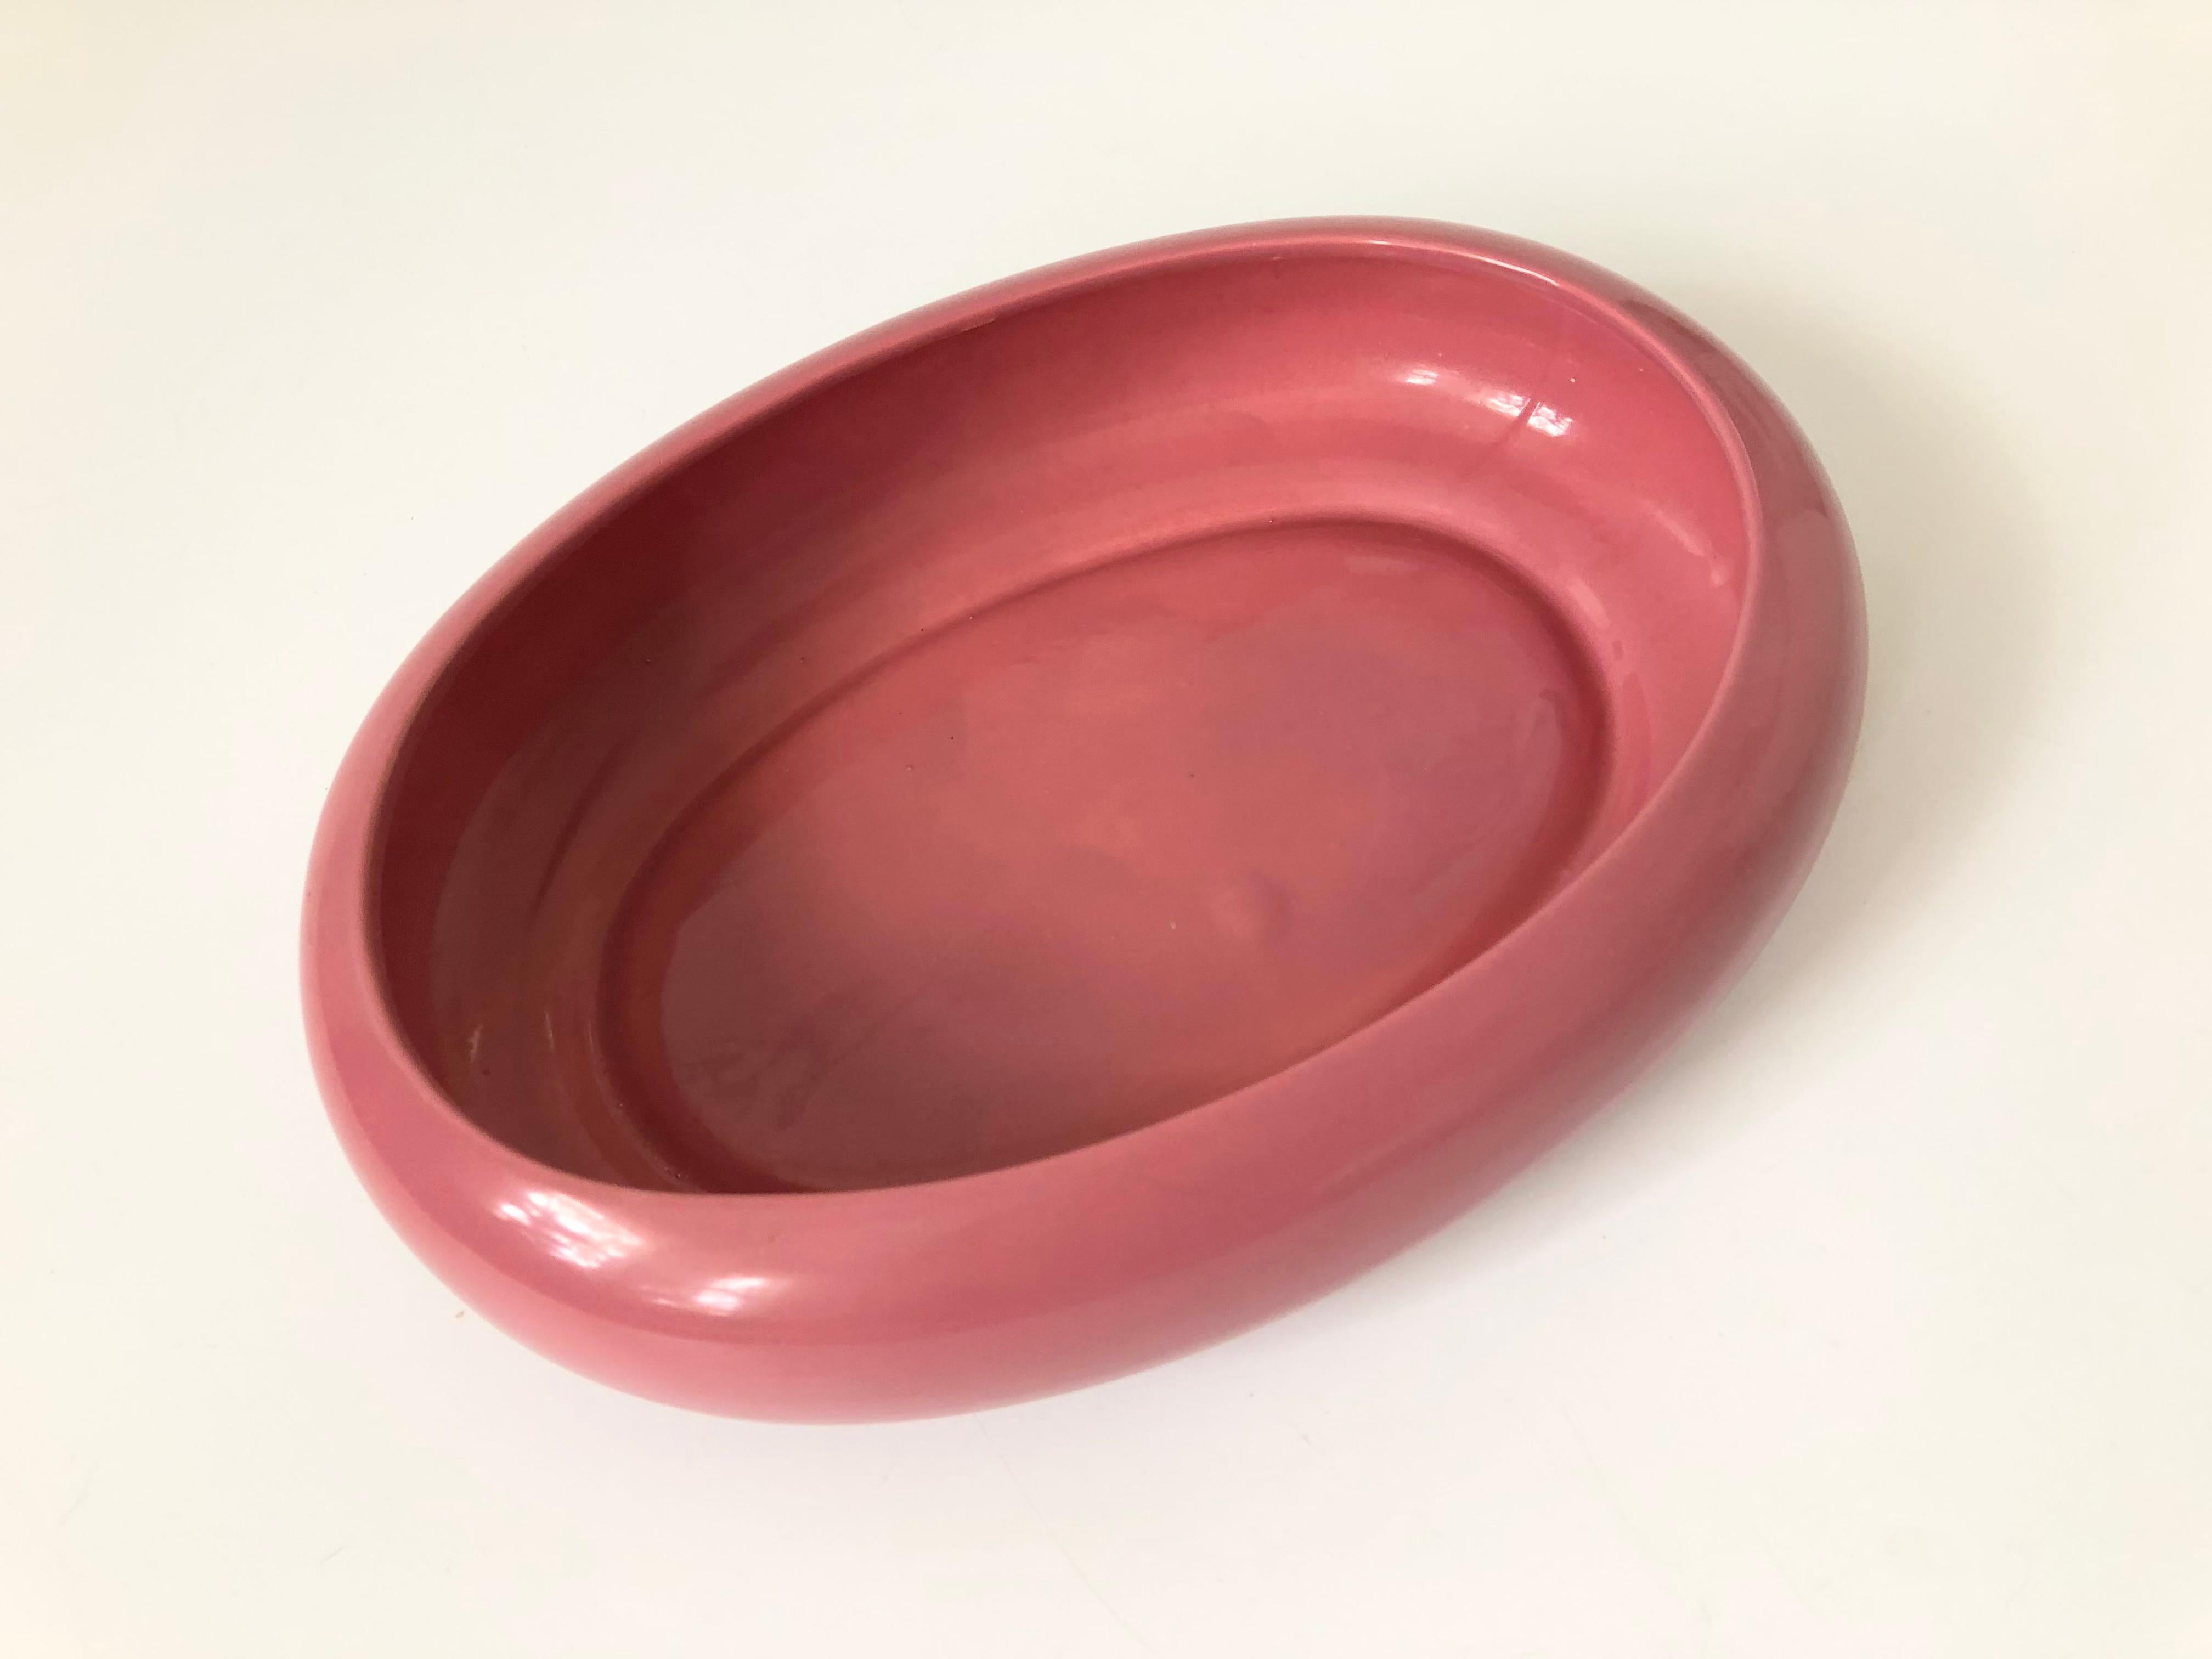 A vintage 1980s oval ceramic tray. Nice shallow bowl shape in a larger size, finished in a glossy pink glaze. Perfect for keeping small items in place or could be used as a shallow planter bowl.
 